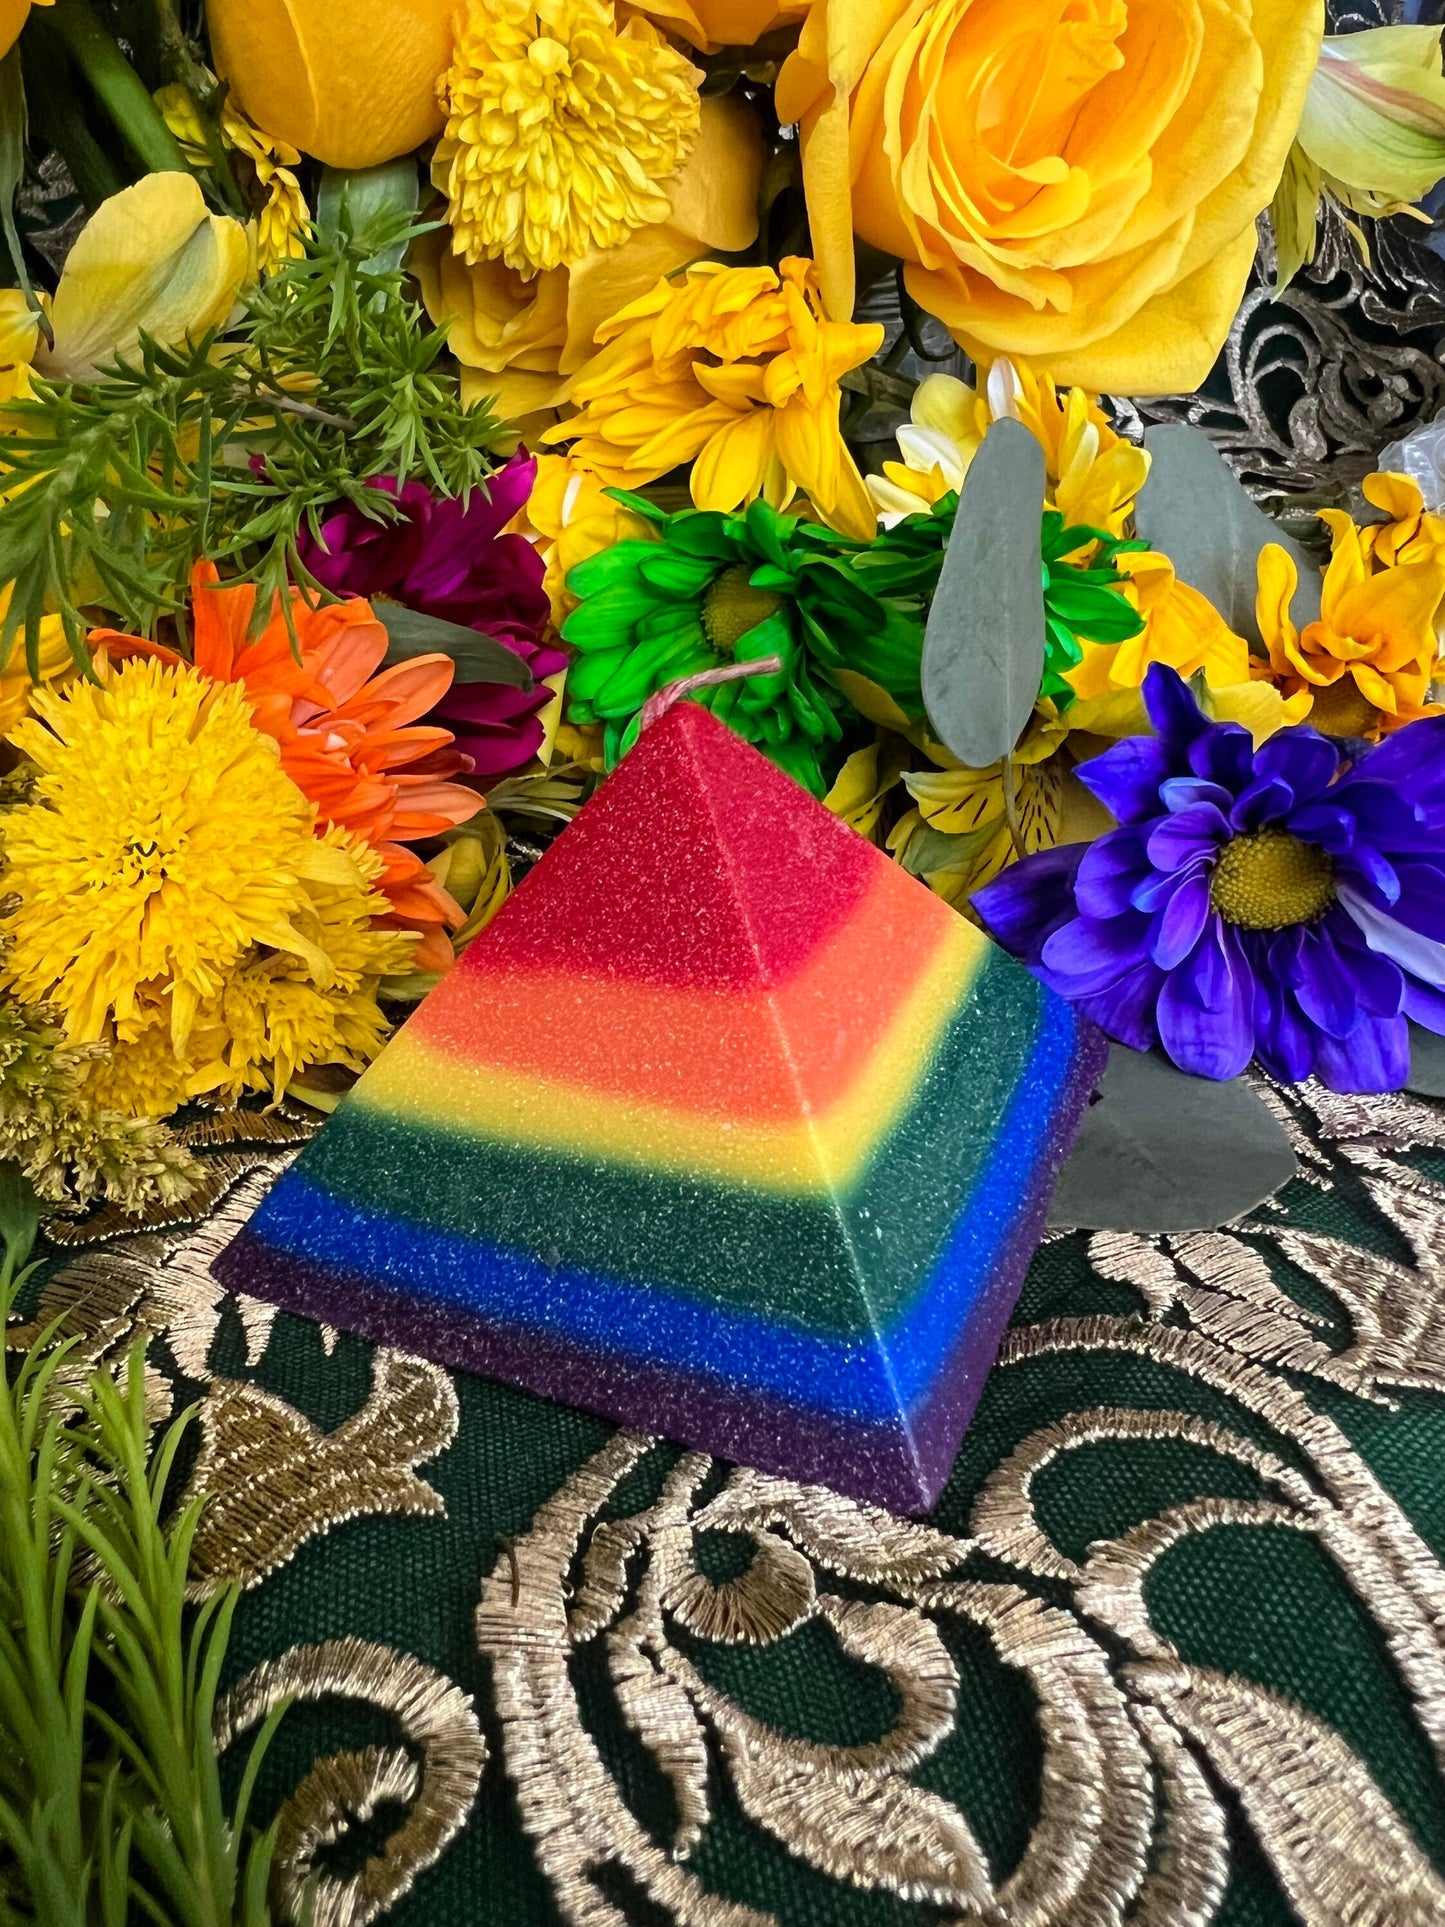 Rainbow Pyramid Candle + Queer Pride + Road Opening